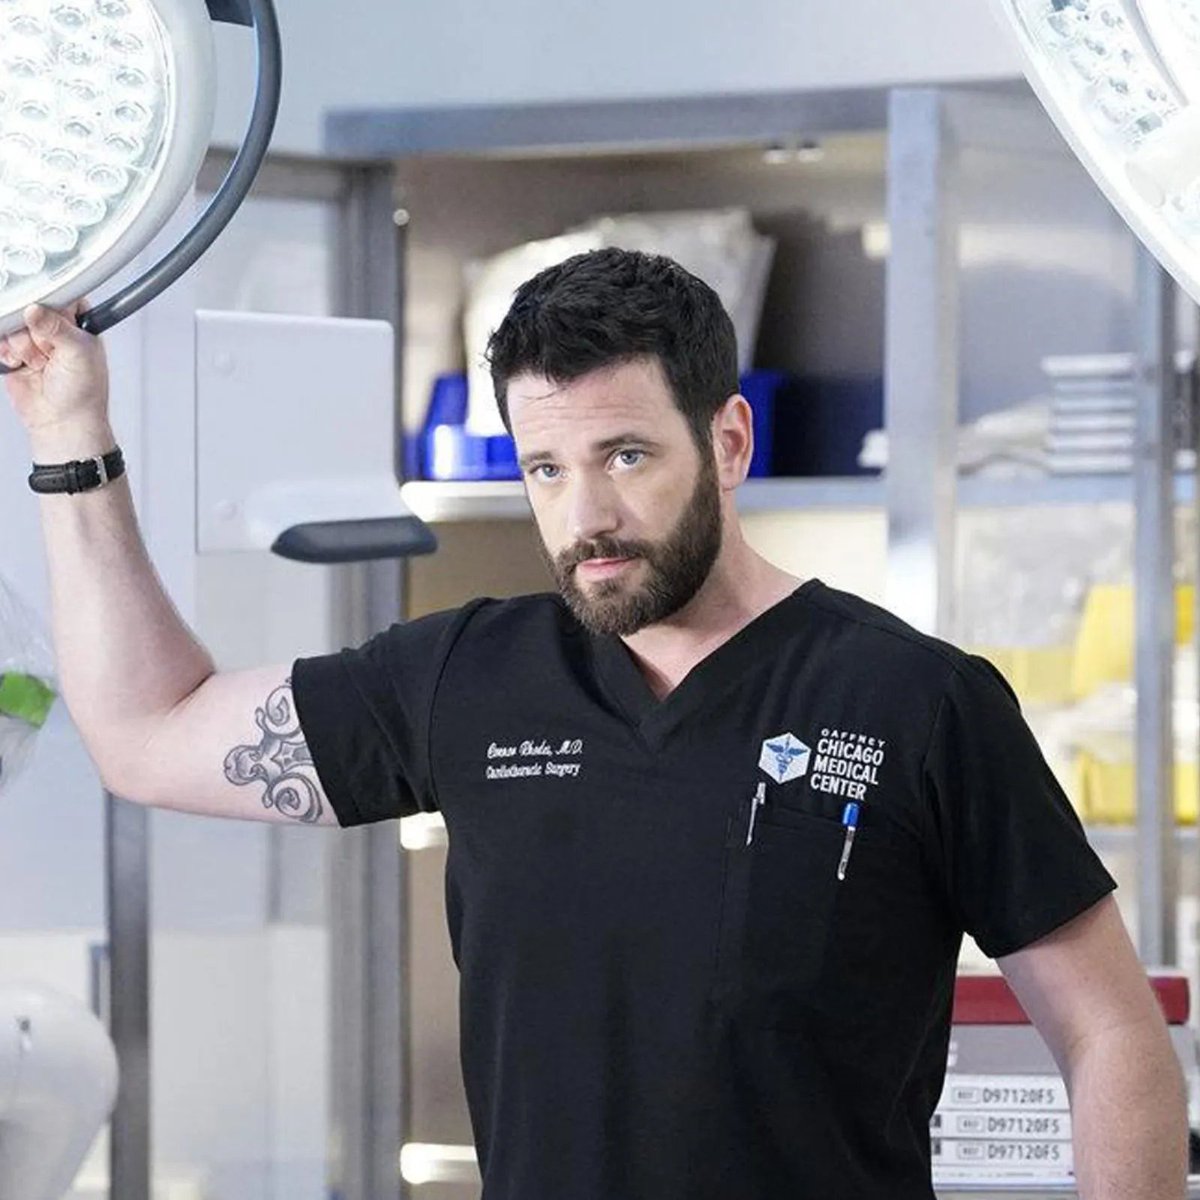 For me Colin Donnell should return to #ChicagoMed since Dr. Connor Rhodes left I lost interest in the show, his character was what got me into the show. At least they didn't kill him off like others